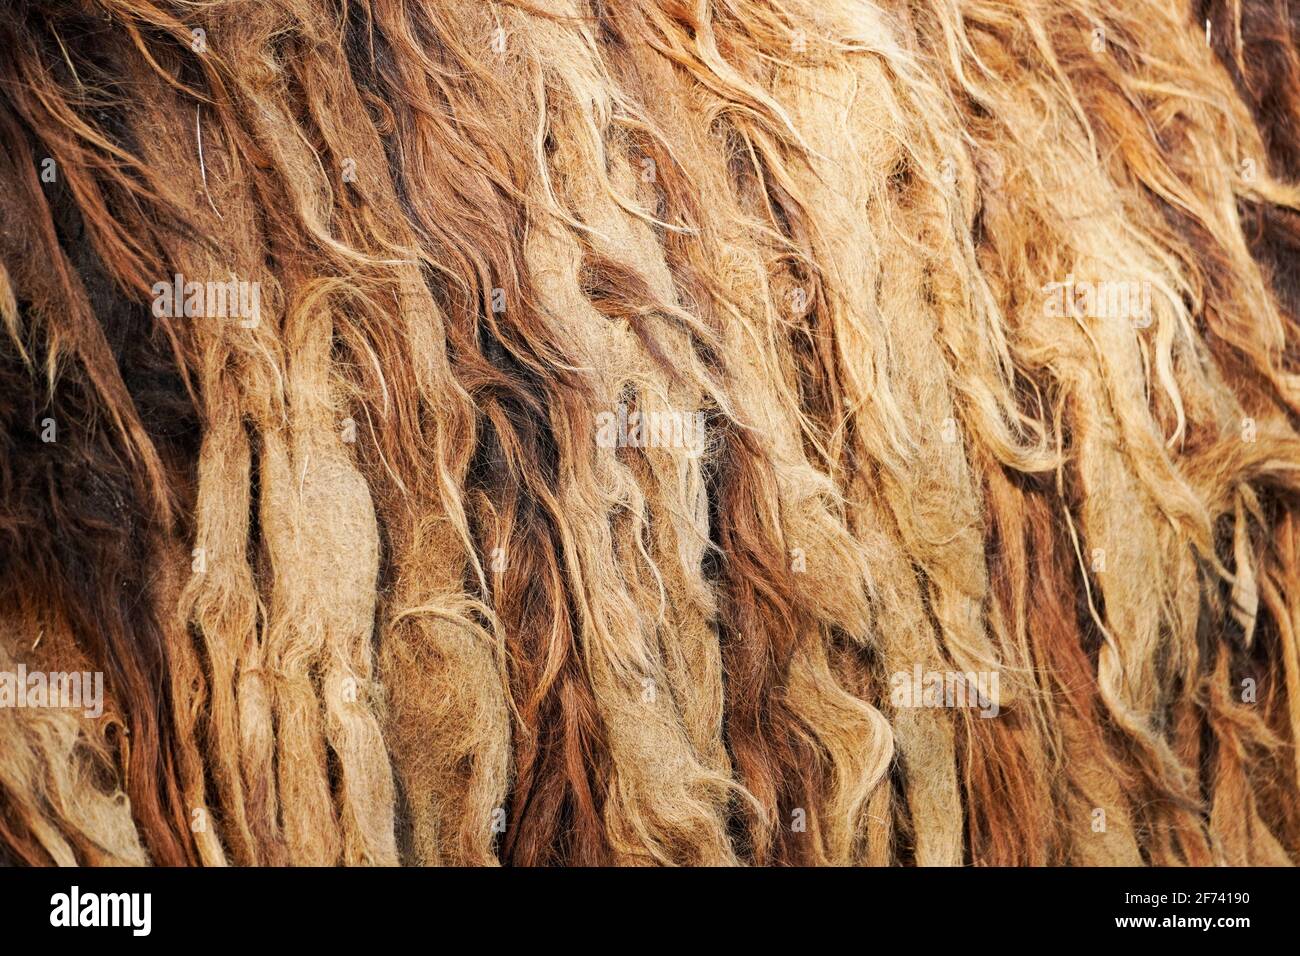 Shaggy matted fur of a donkey. Brown animal fur as a close up as a background. Donkey dreadlocks. Stock Photo